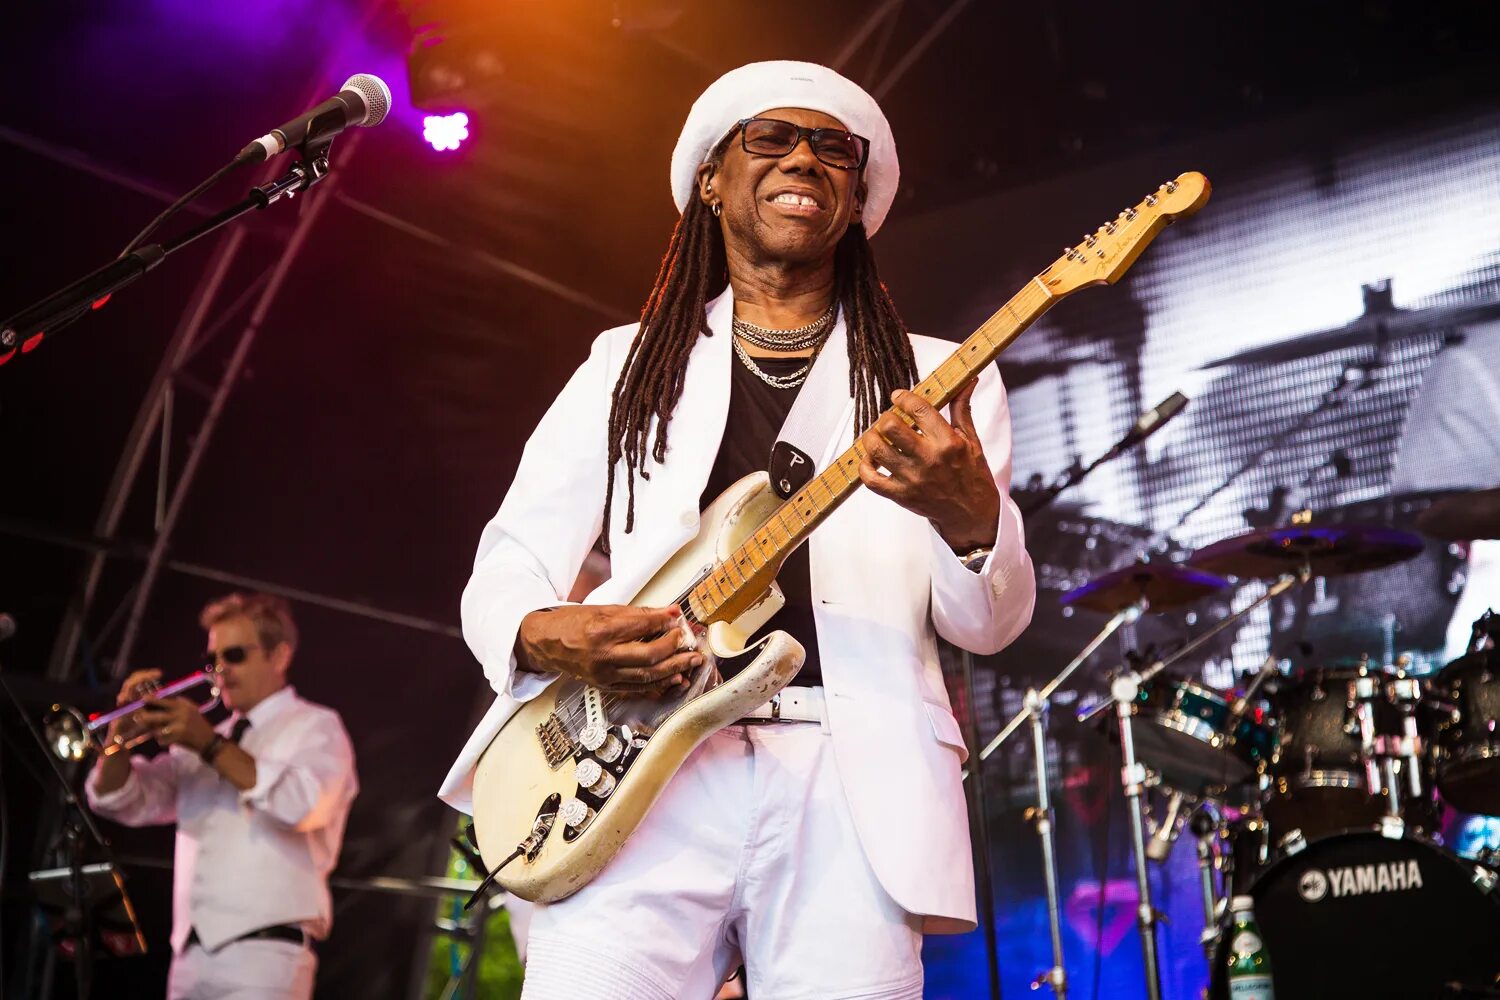 Nile Rodgers. Nile Rodgers Chic. Nile Band. Nile Gregory Rodgers. Top famous